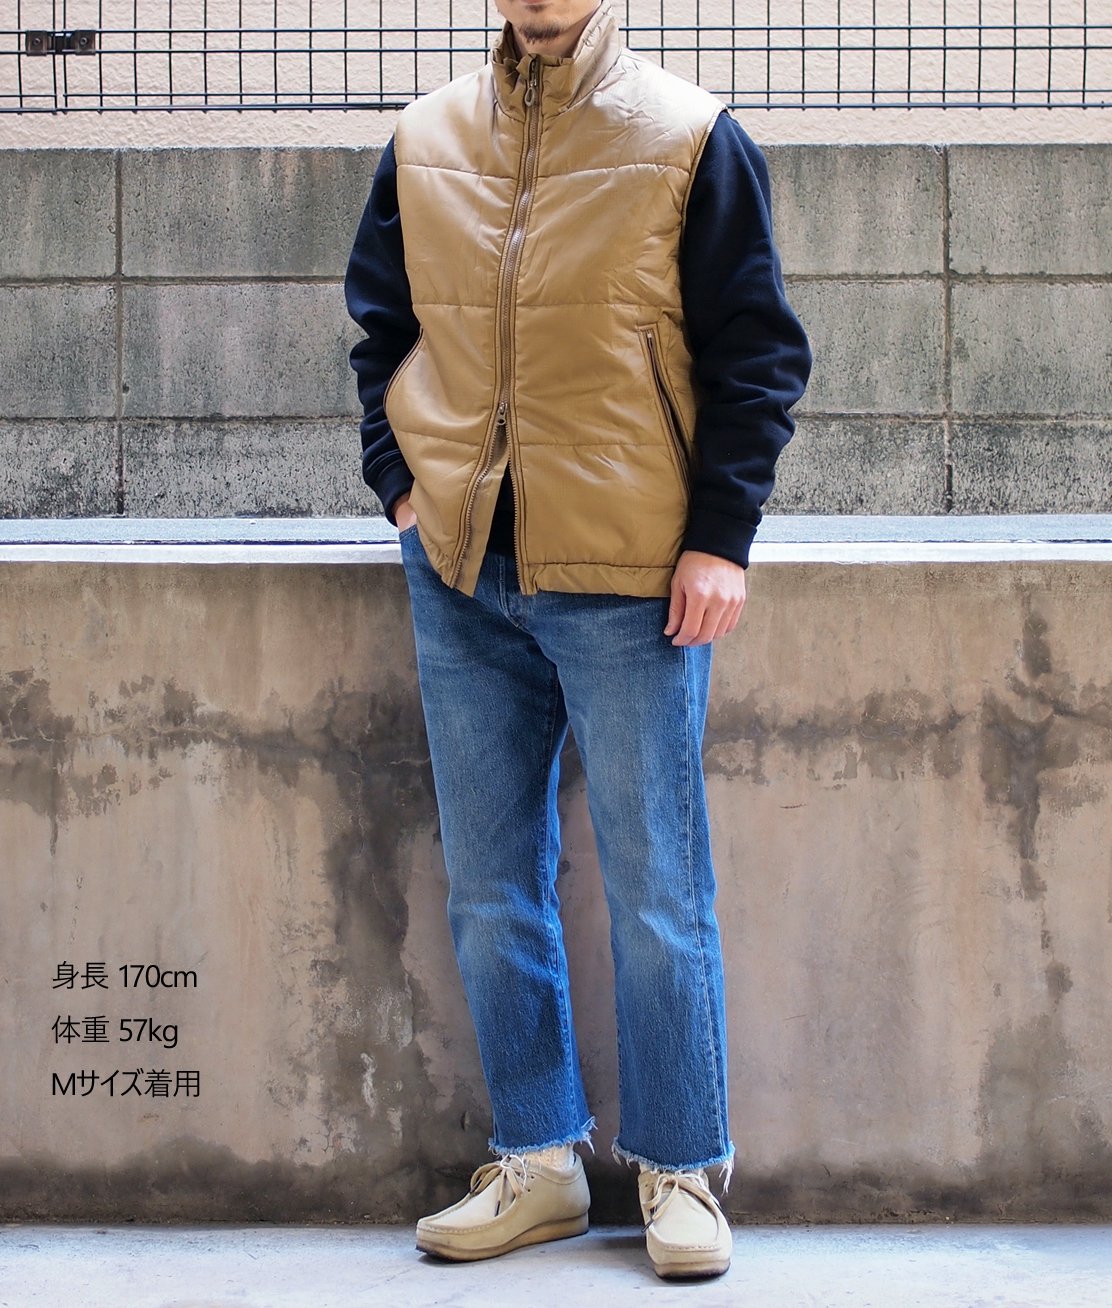 US MILITARY】BEYOND A7 HIGH LOFT COLD VEST - COYOTE 米軍 ビヨンド